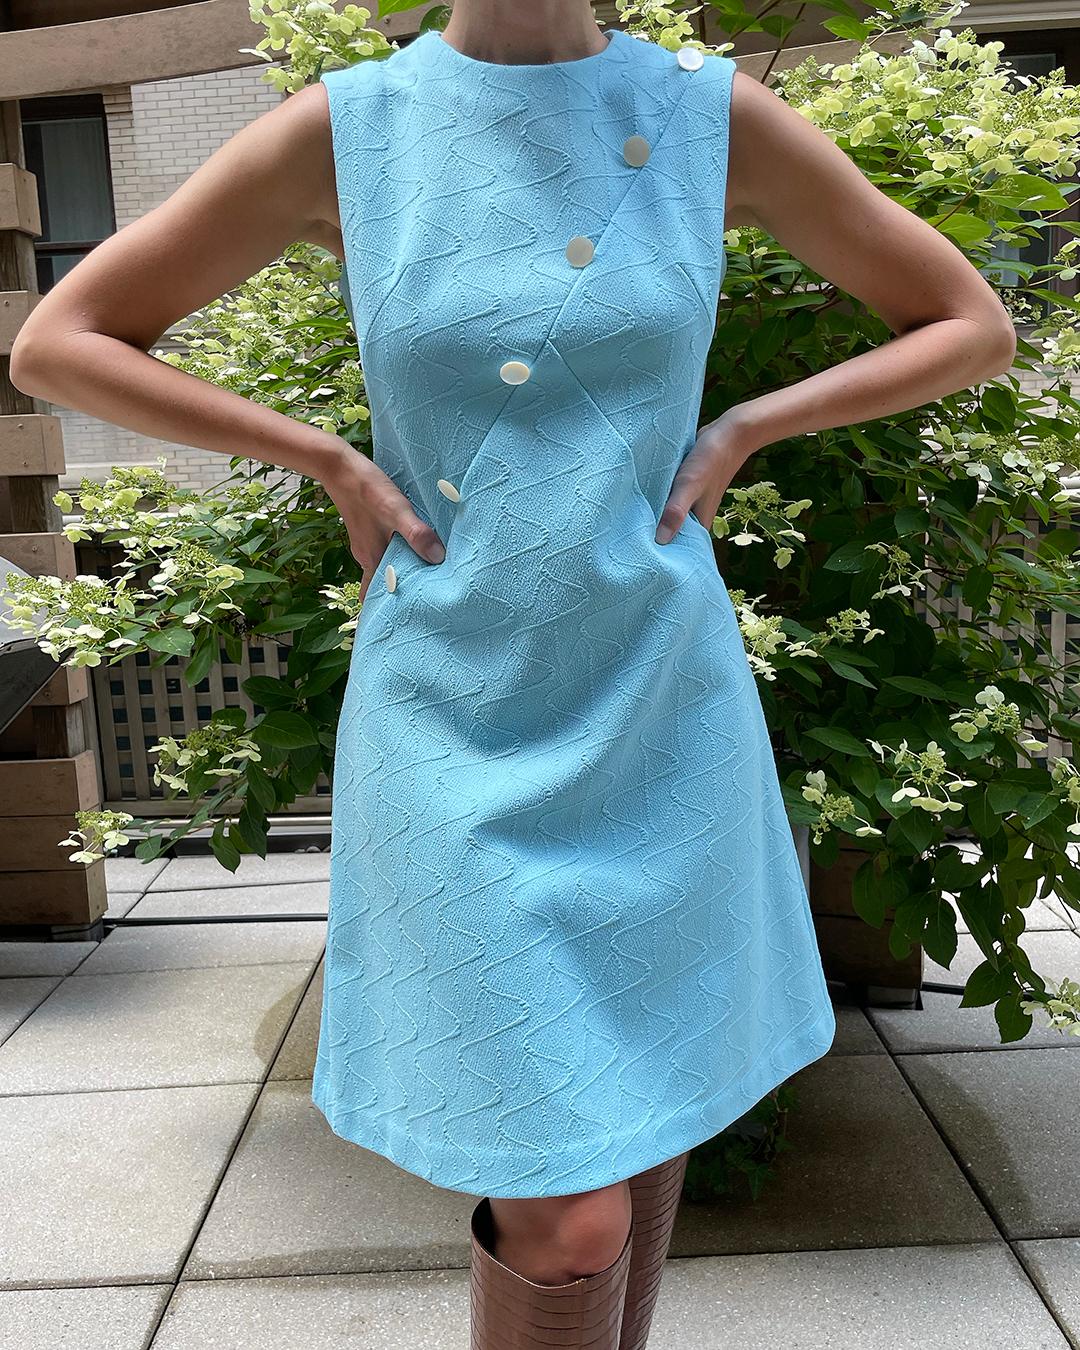 This dress was made in the early 1960s, and is very much in the style of Pierre Cardin, who really ushered in the Space Age craze of that era. Recently we've seen this mod, Space Age style trending on the runways, so it's very fun to get that look